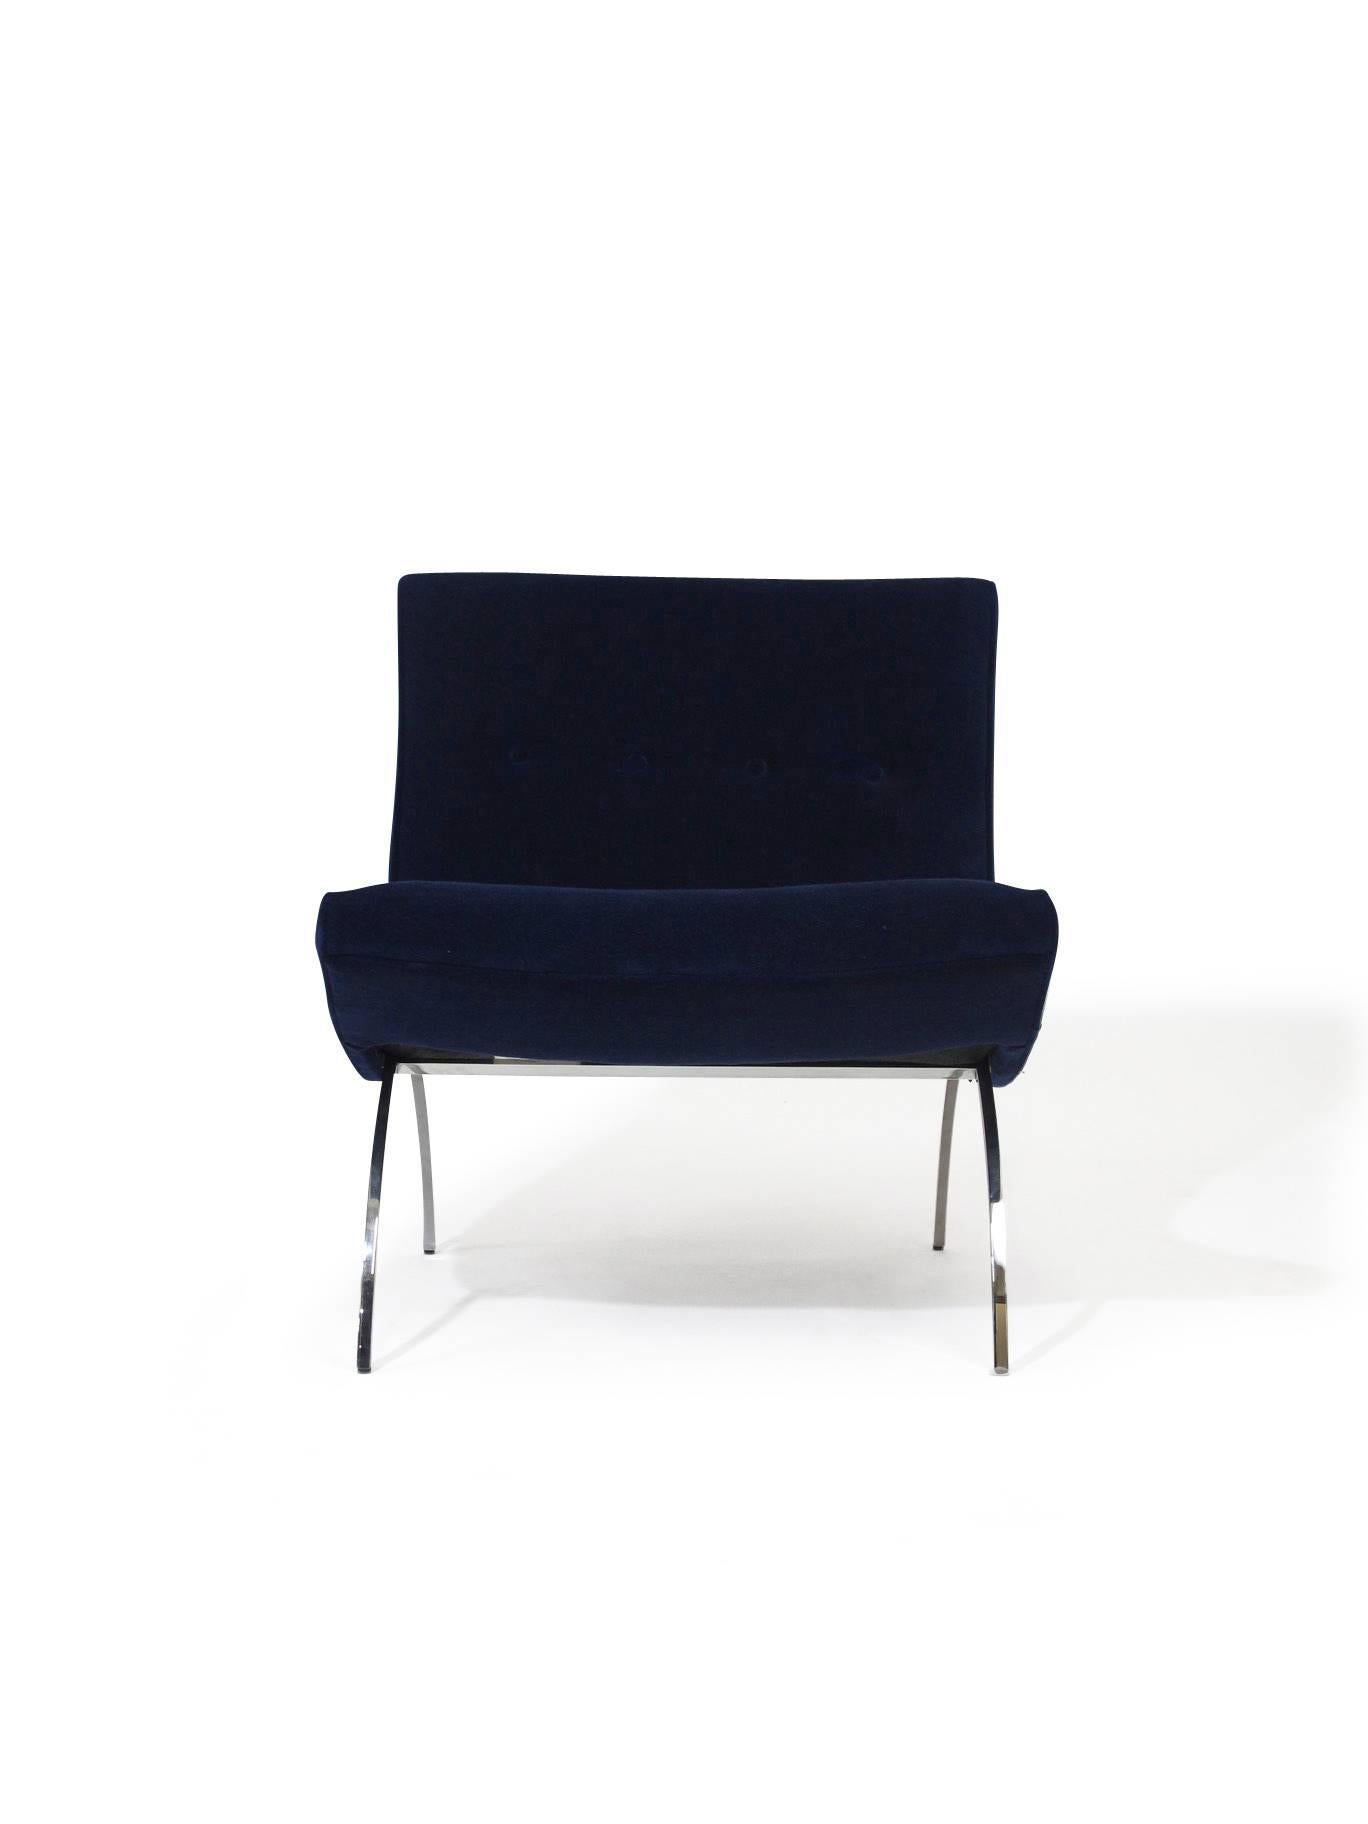 Midcentury designed scoop chair by Milo Baughman for Thayer Coggin lounge chair upholstered in navy velvet, raised on polished stainless steel arched legs.

